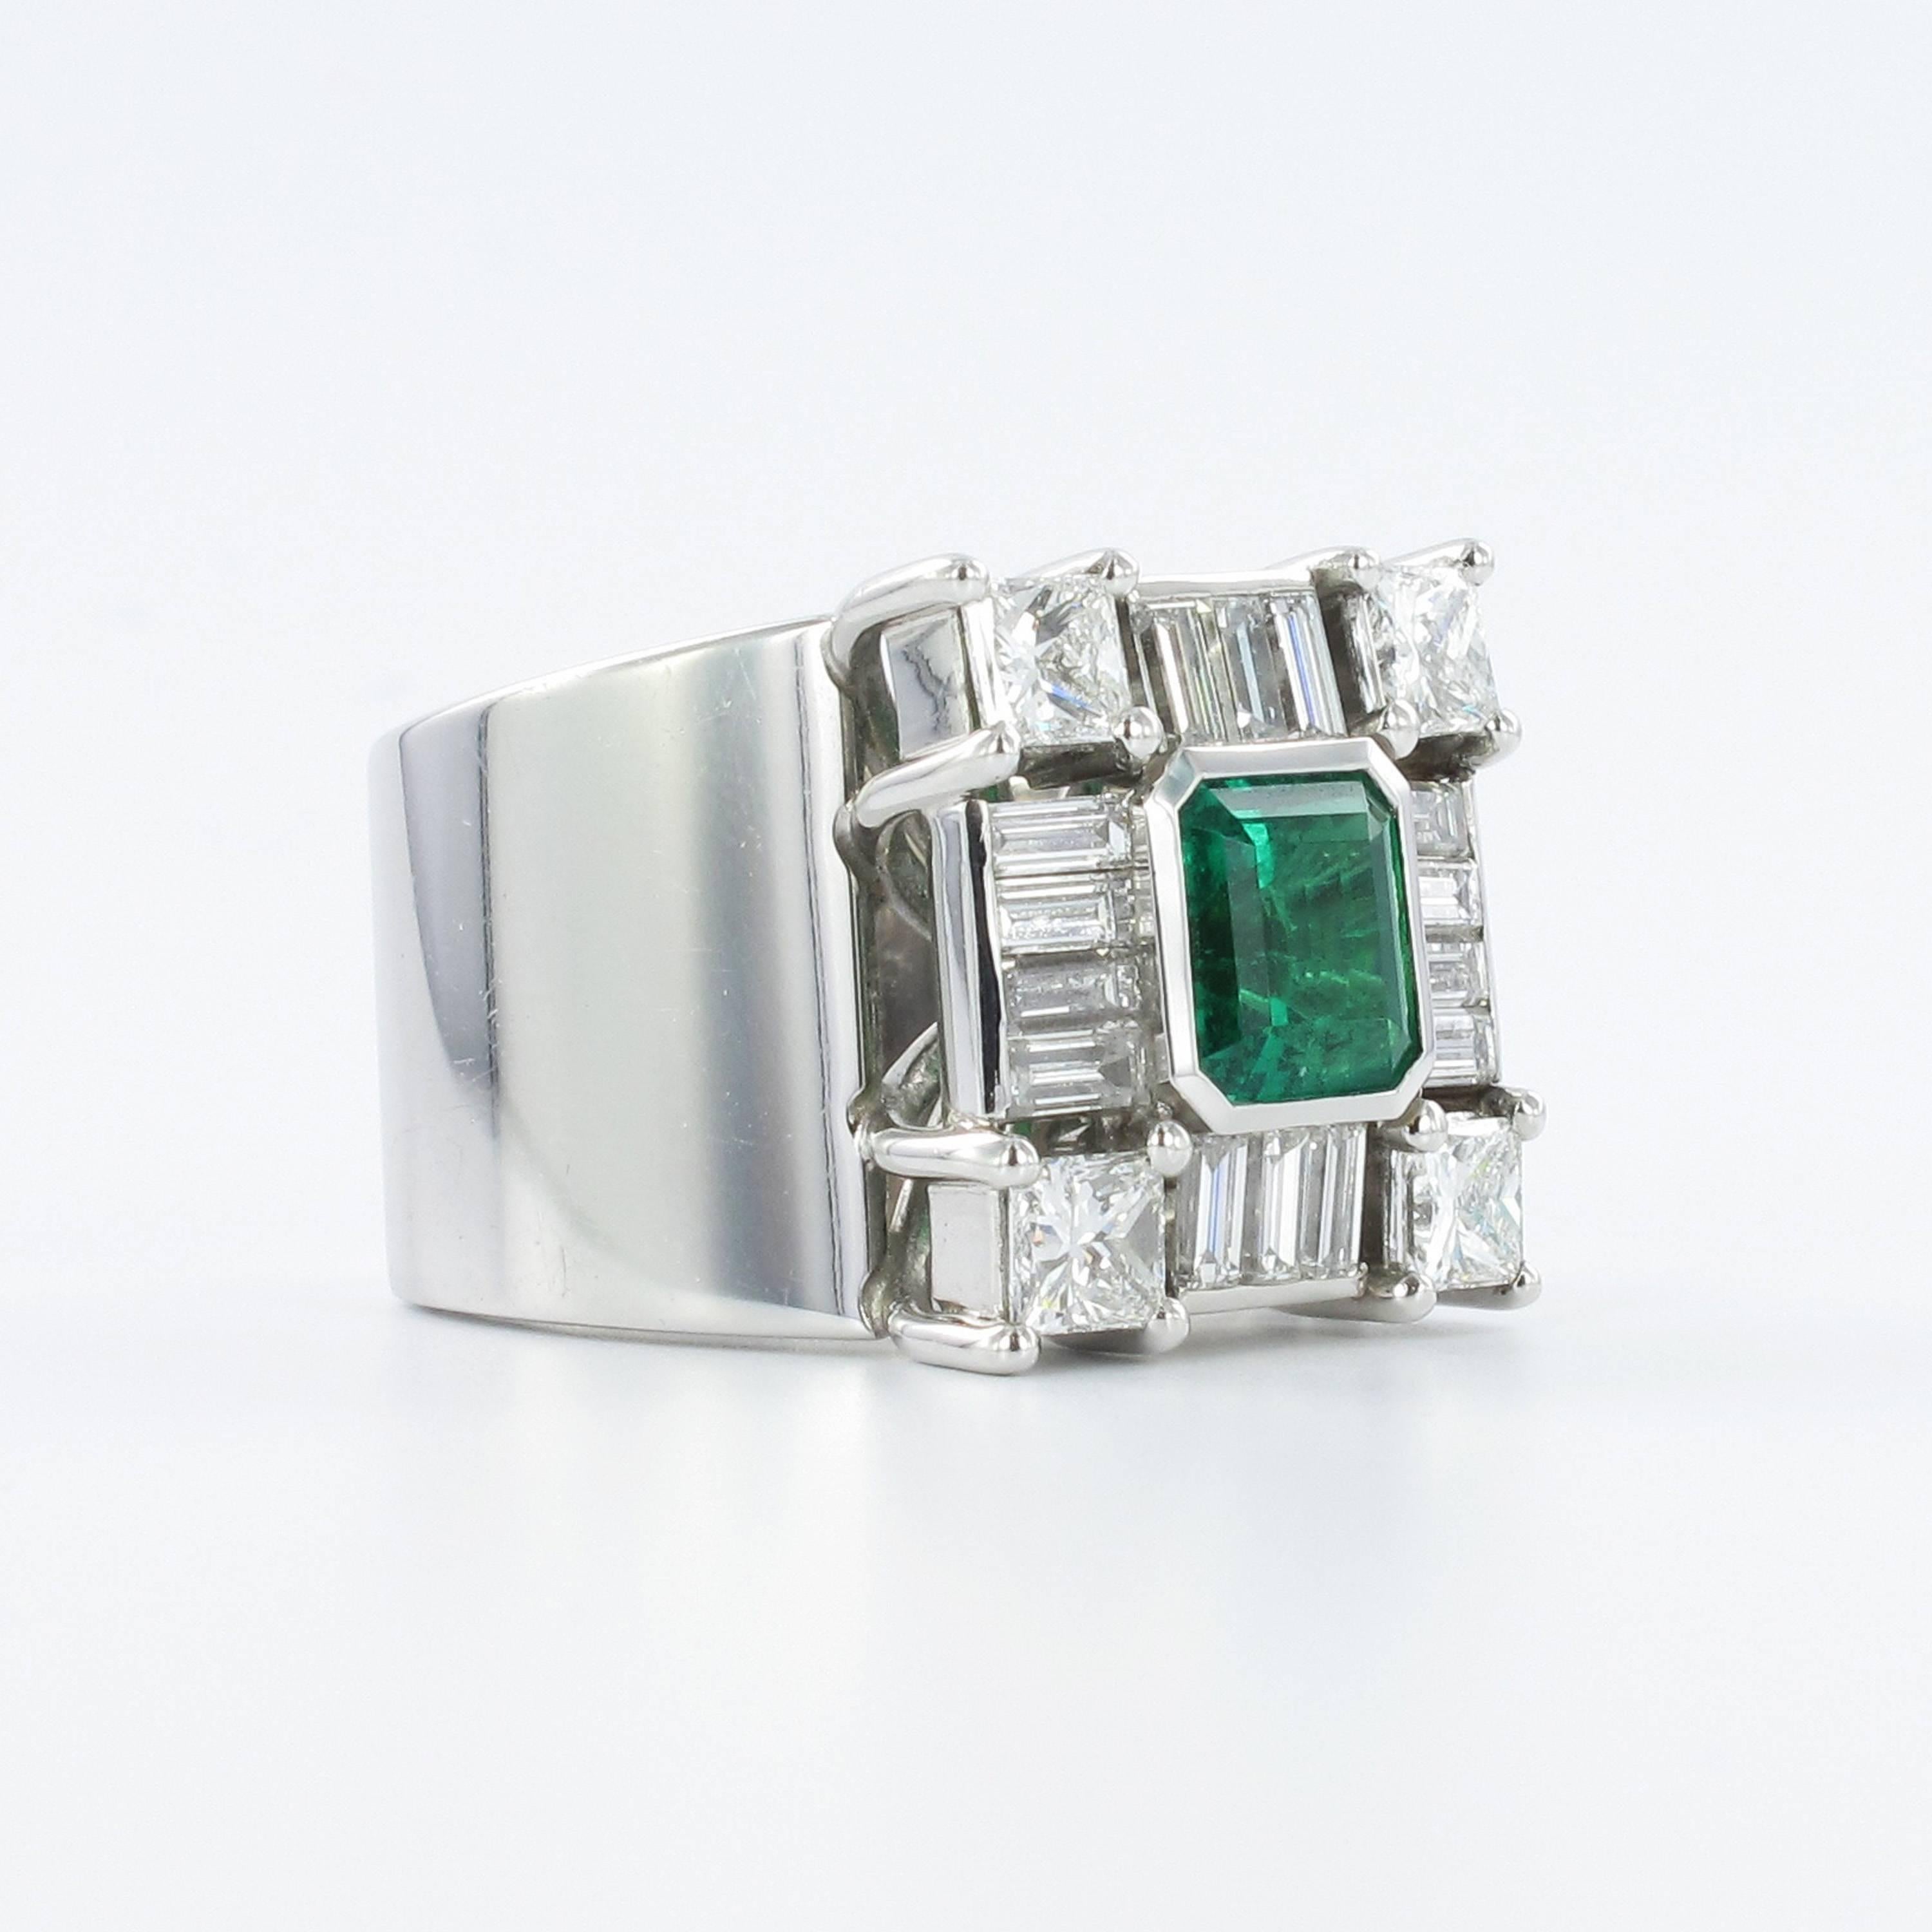 Emerald and diamond ring in 18k white gold. Set with an octagonal step-cut emerald with an approximate weight of 1.94 carats, encircled by four princess cut diamonds and 14 baguette cut diamonds with an approximate combined weight of 3.00 carats, G